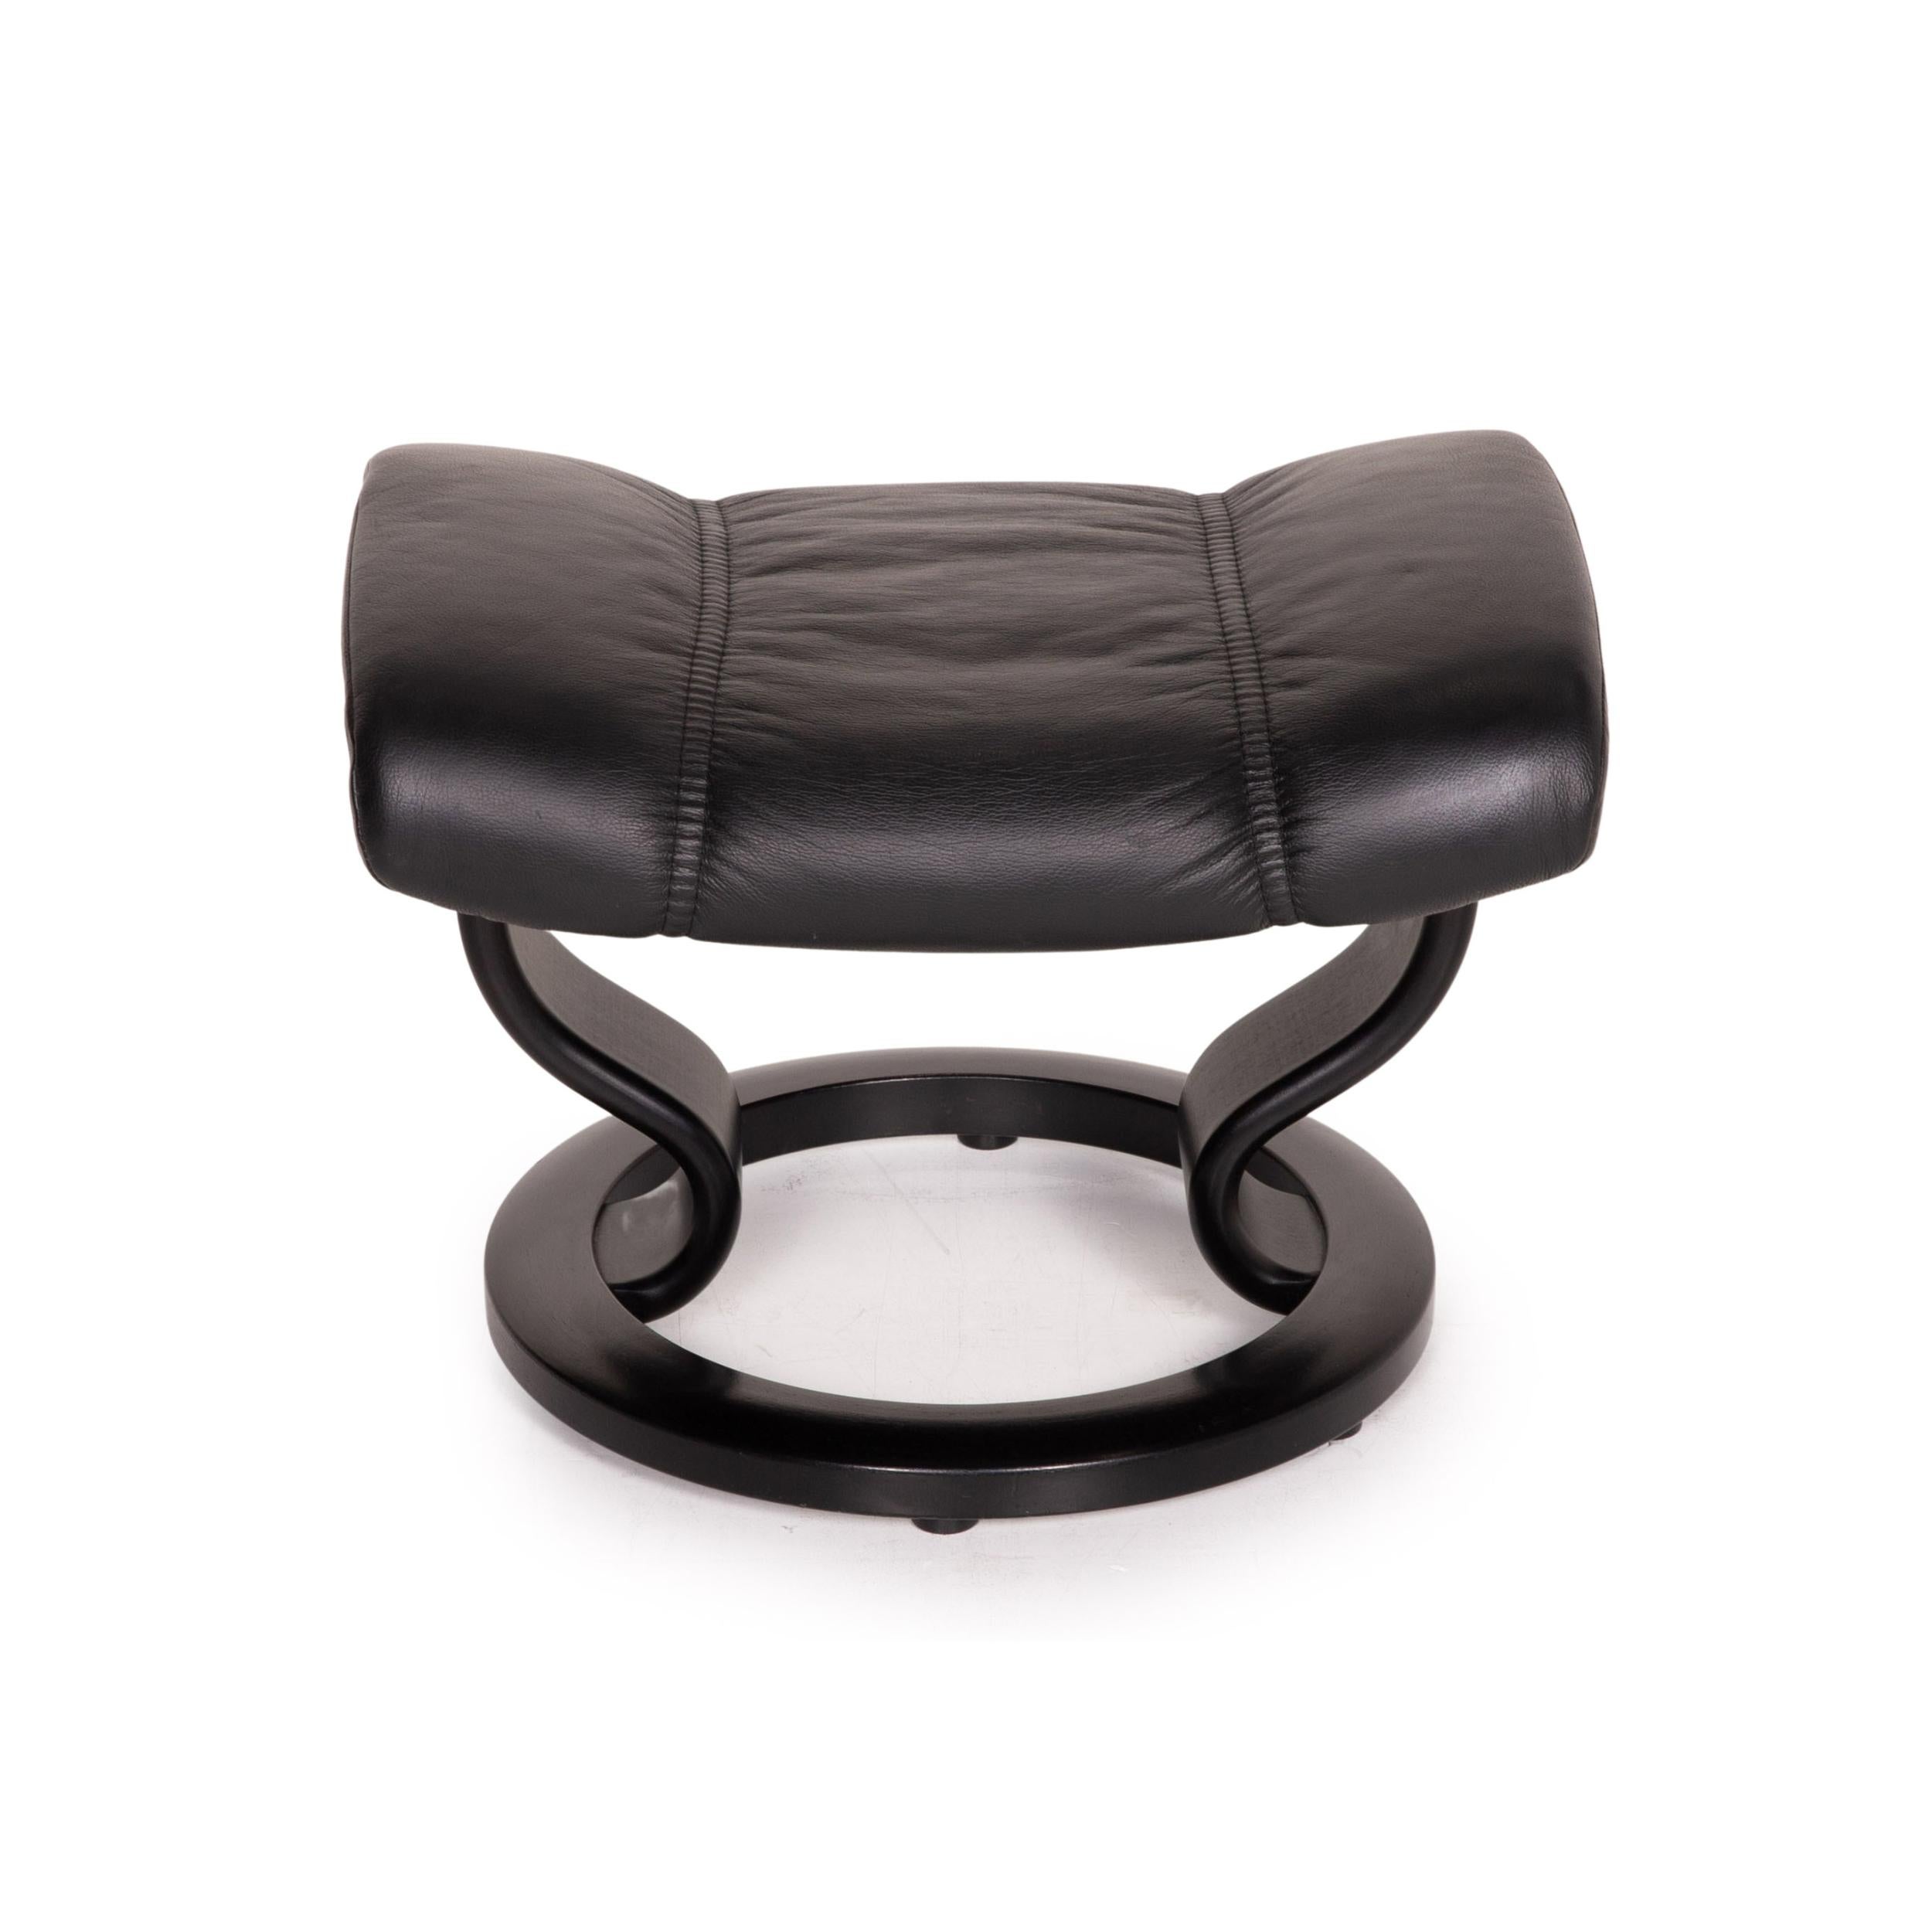 Stressless Consul Leather Armchair Incl. Stool Black Function Relaxation For Sale 11